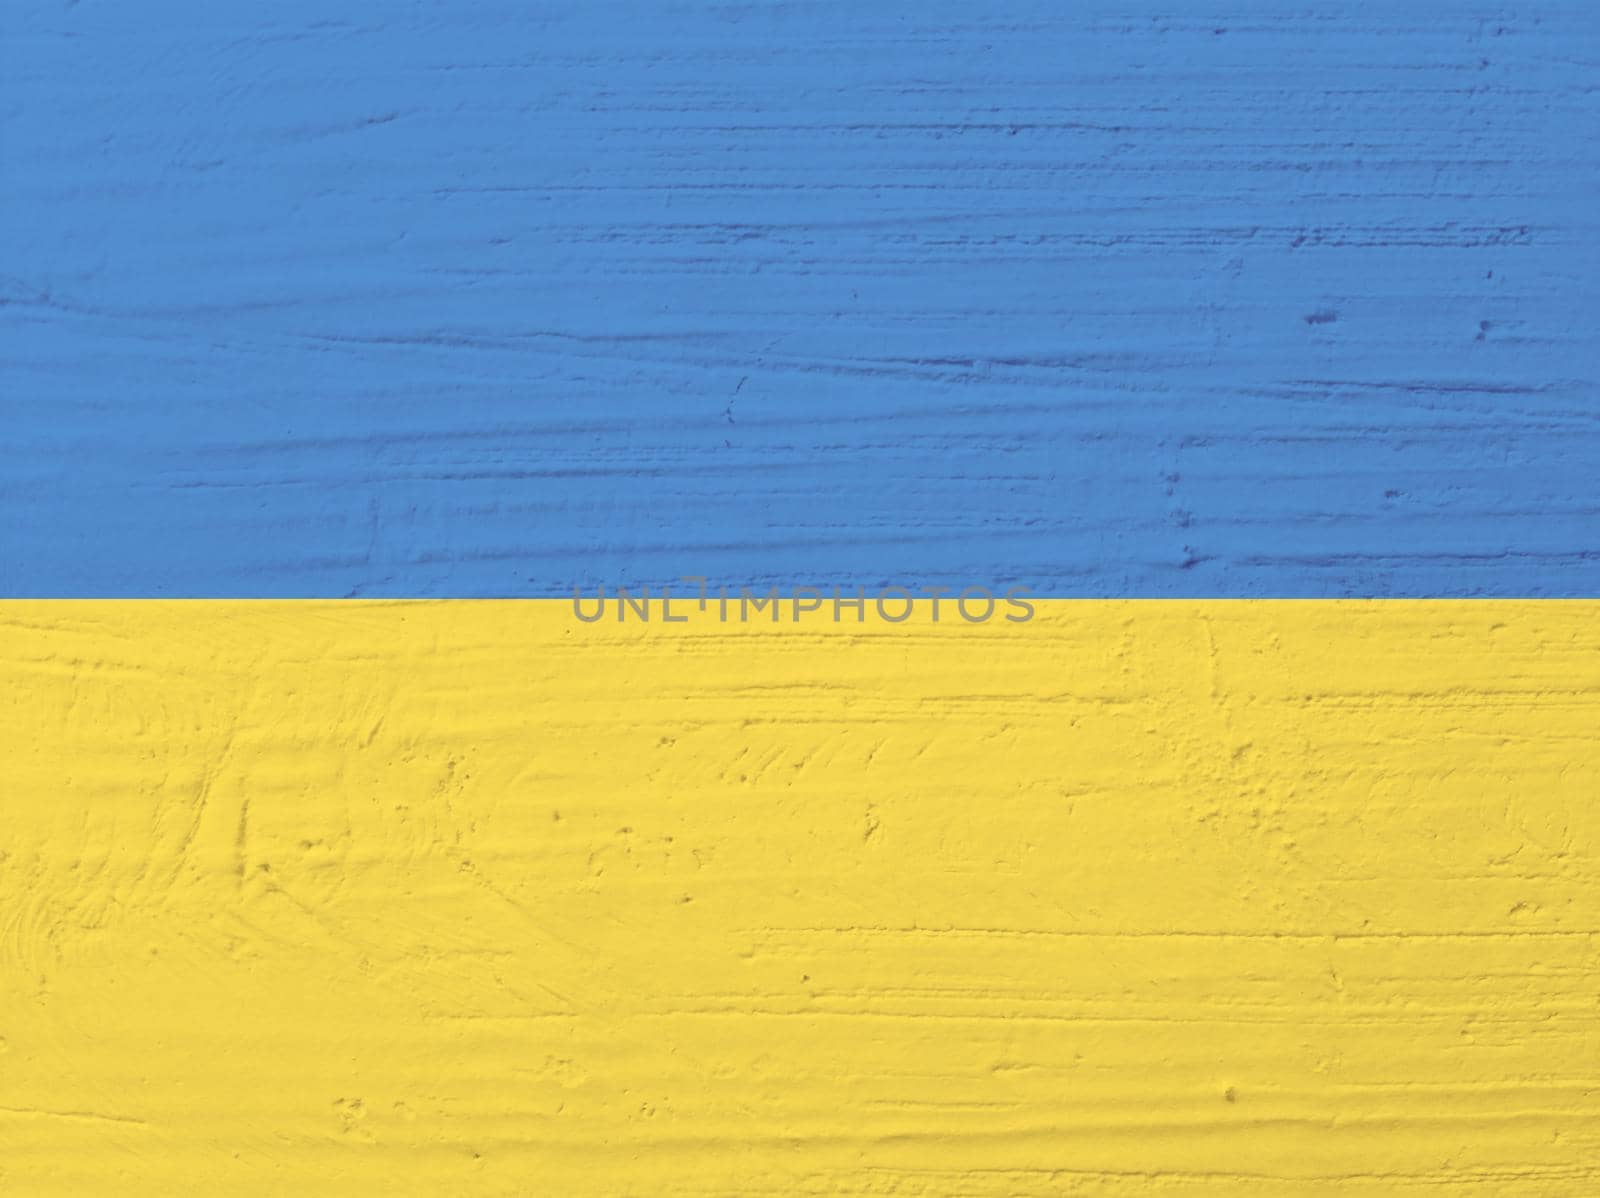 Plastering wall with blue and yellow collors.